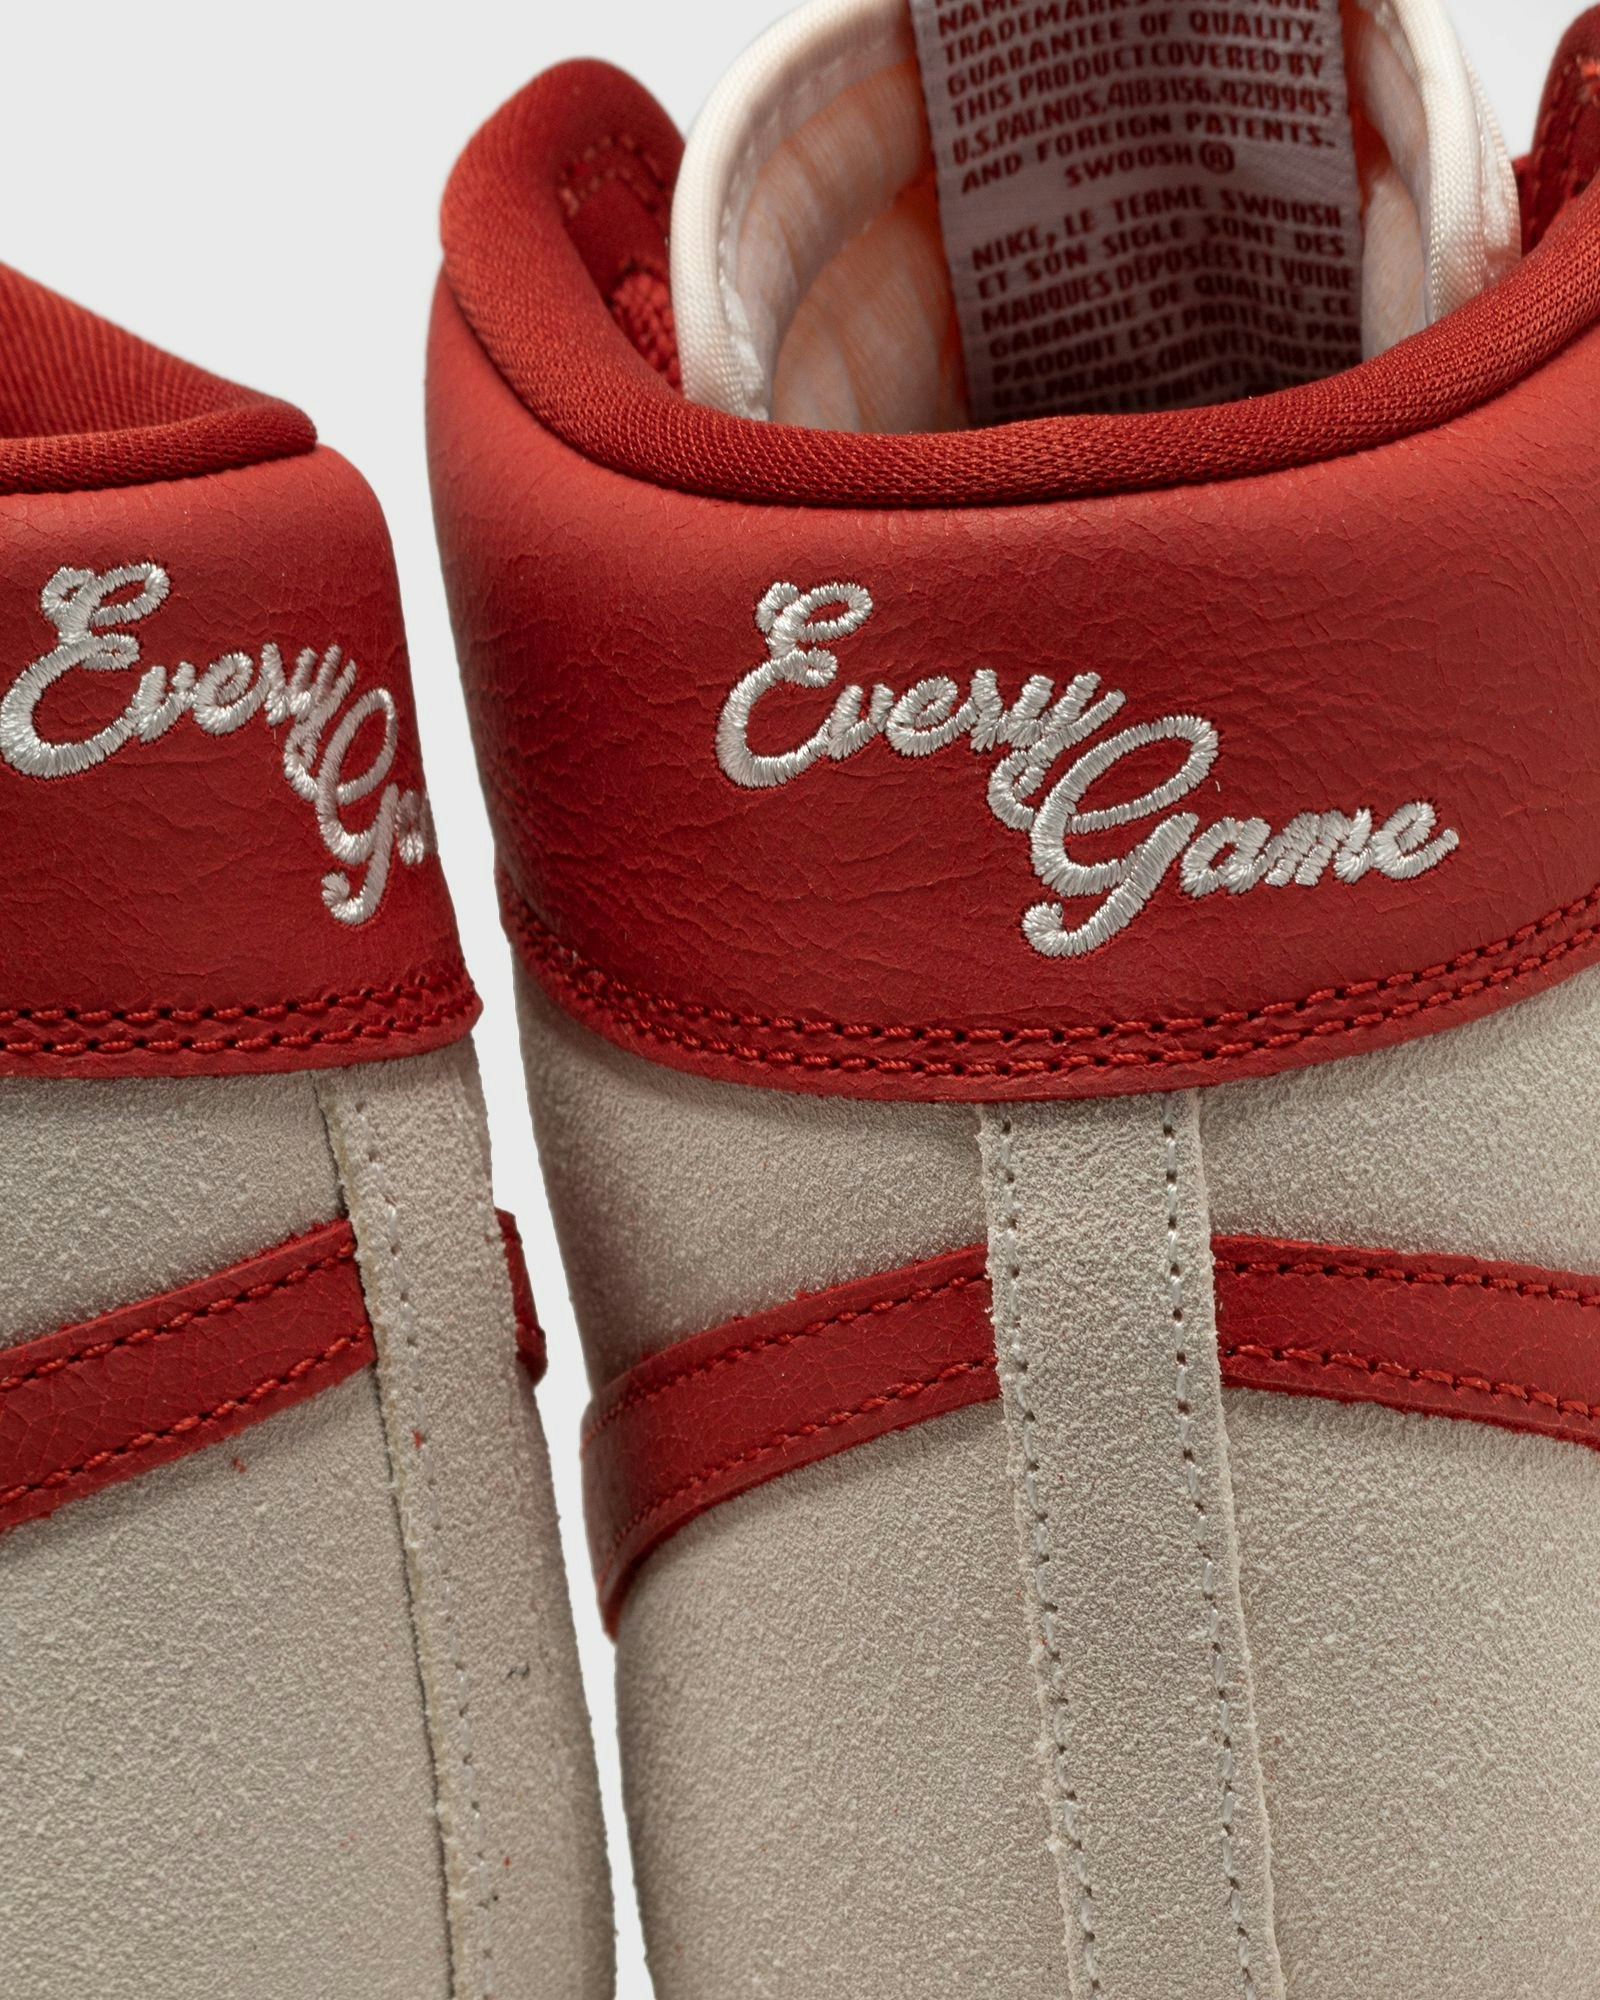 Nike Air Ship SP "Every Game" (Dune Red)